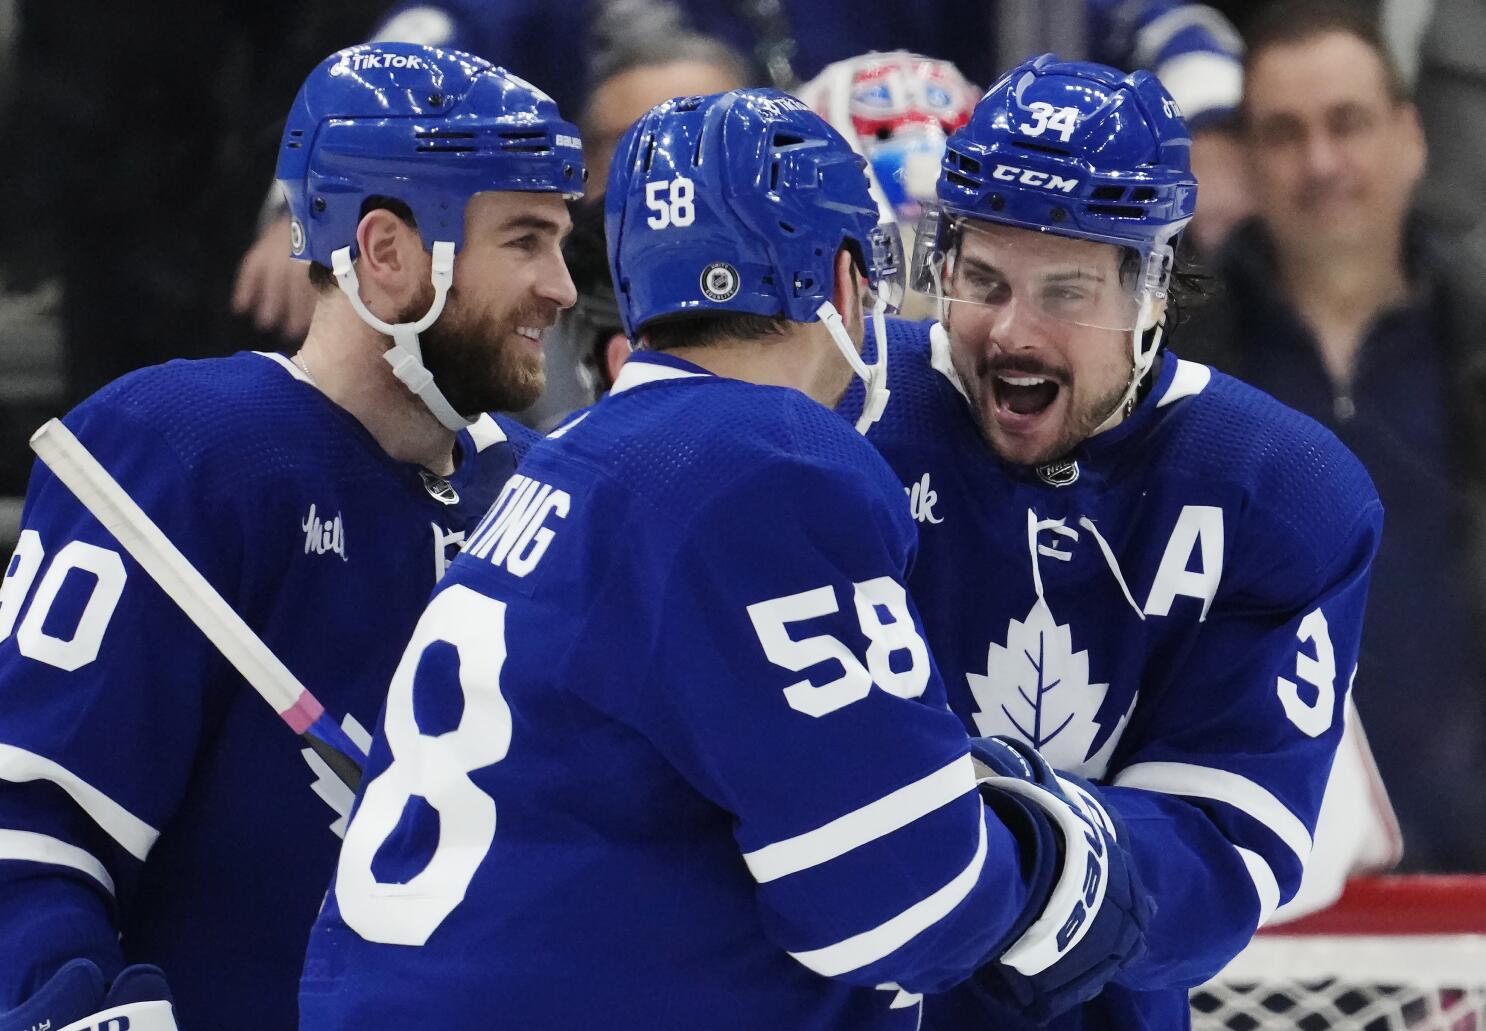 Maple Leafs-Canadiens playoff matchup a no-fan zone in Toronto